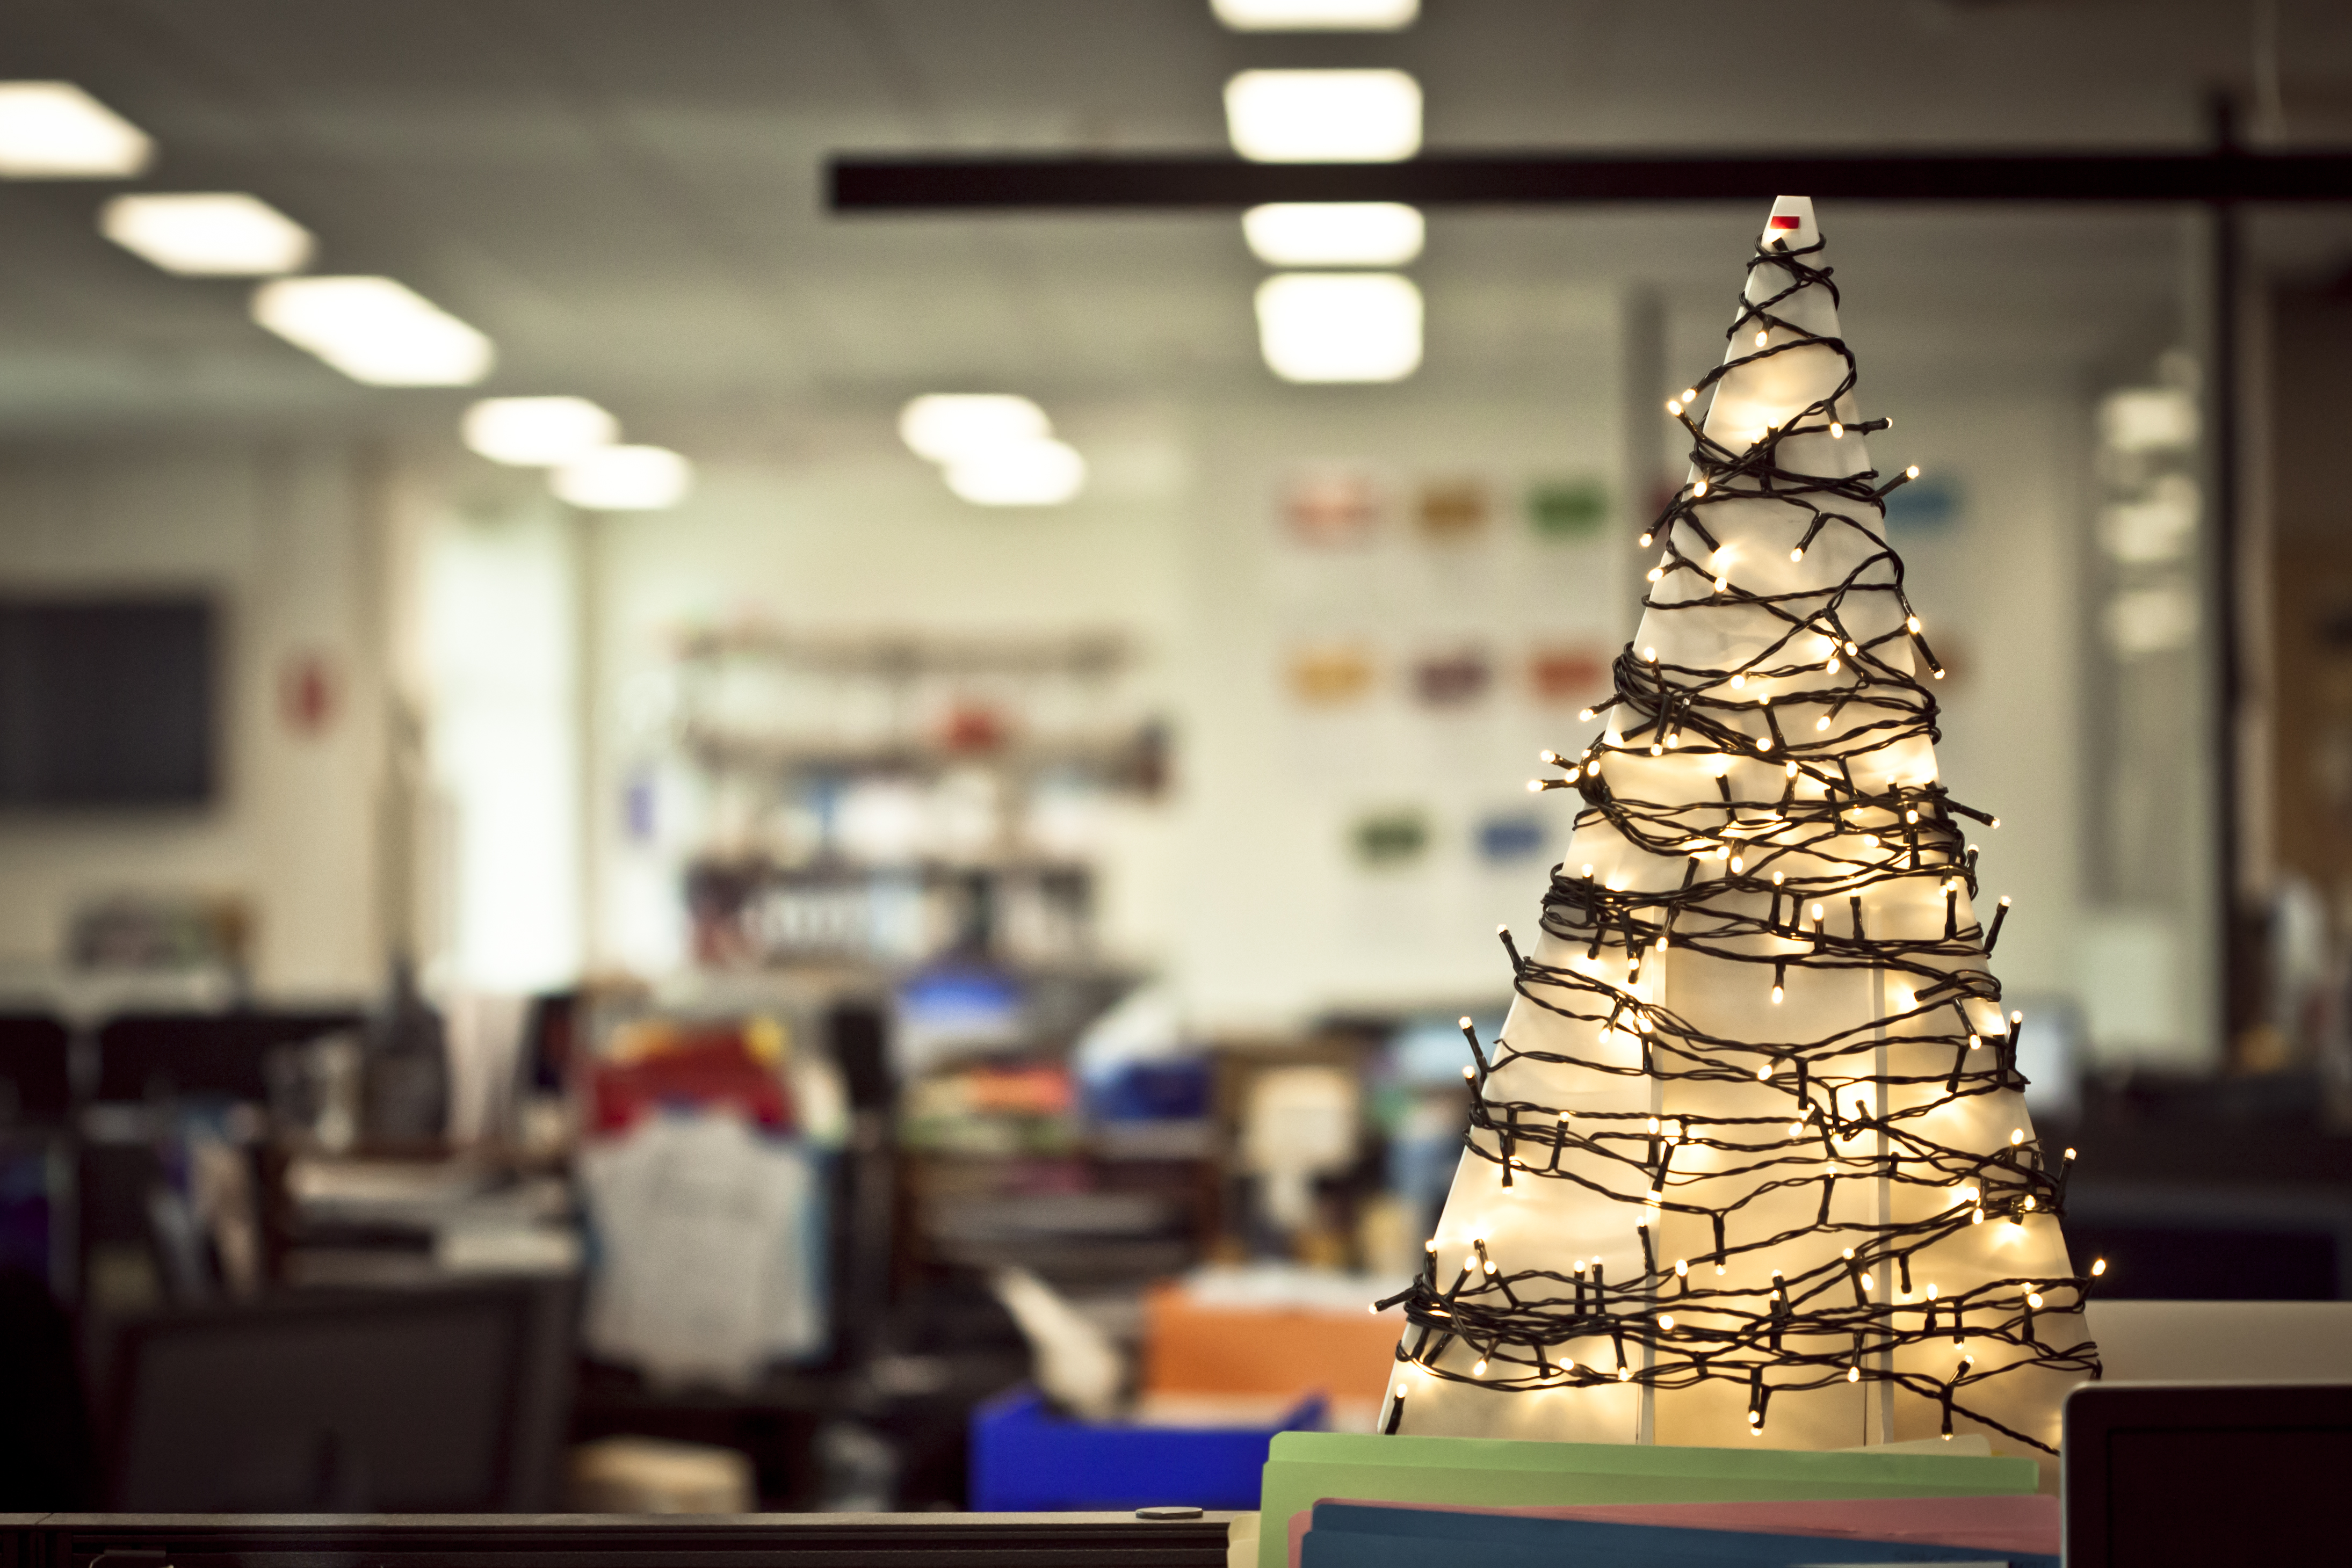 Ideas for Office Door Decorating Contest for Christmas | eHow